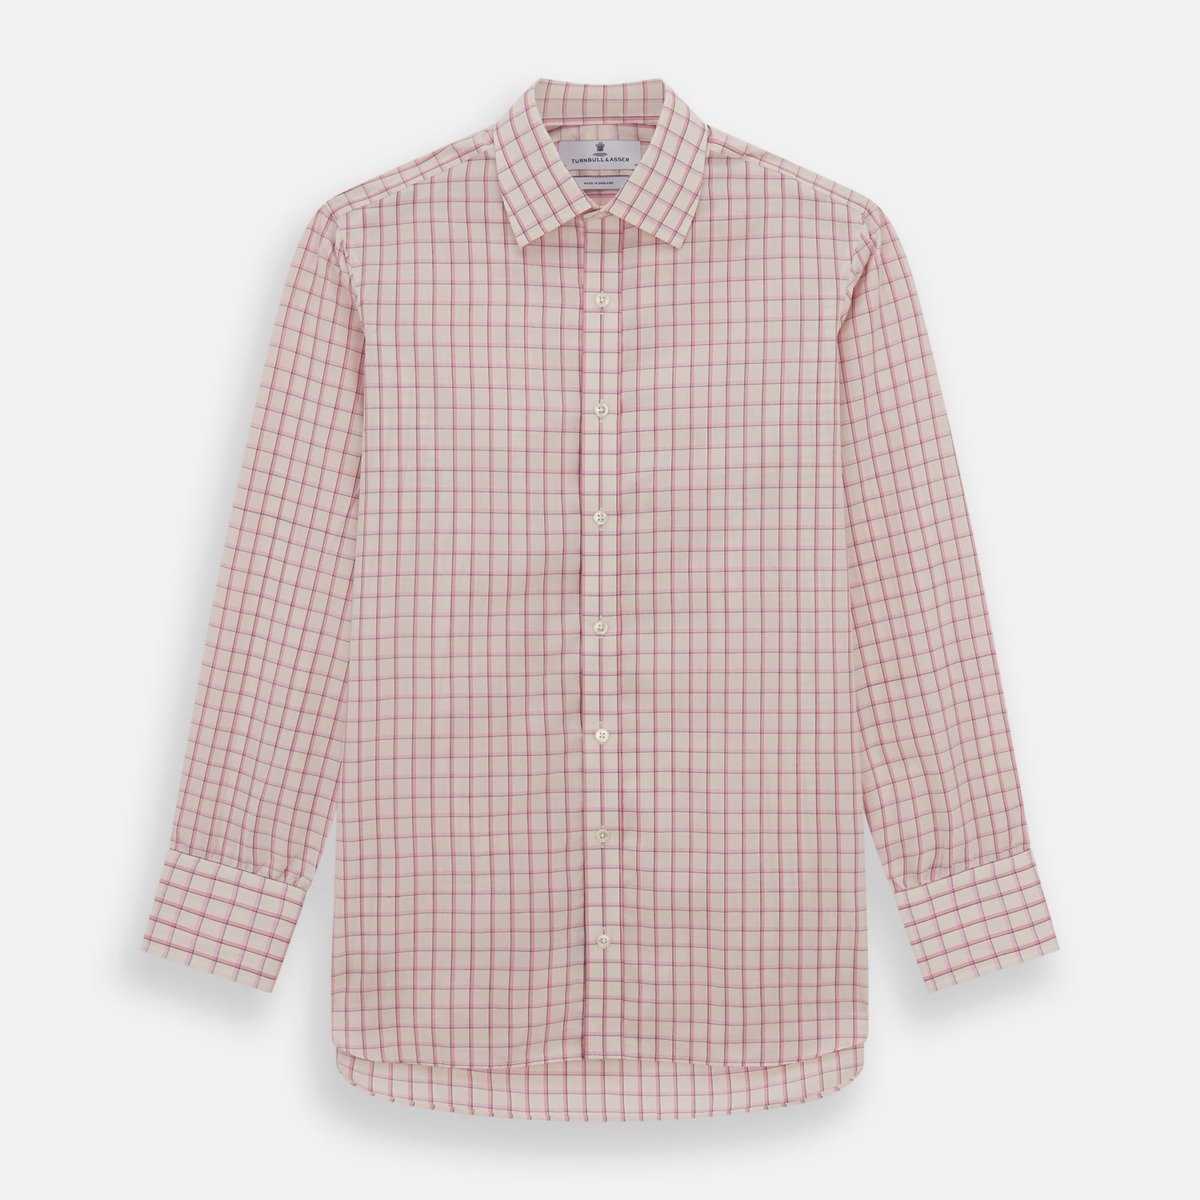 Turnbull & Asser Gents Shirt Checked from Turnbull And Asser GOOFASH